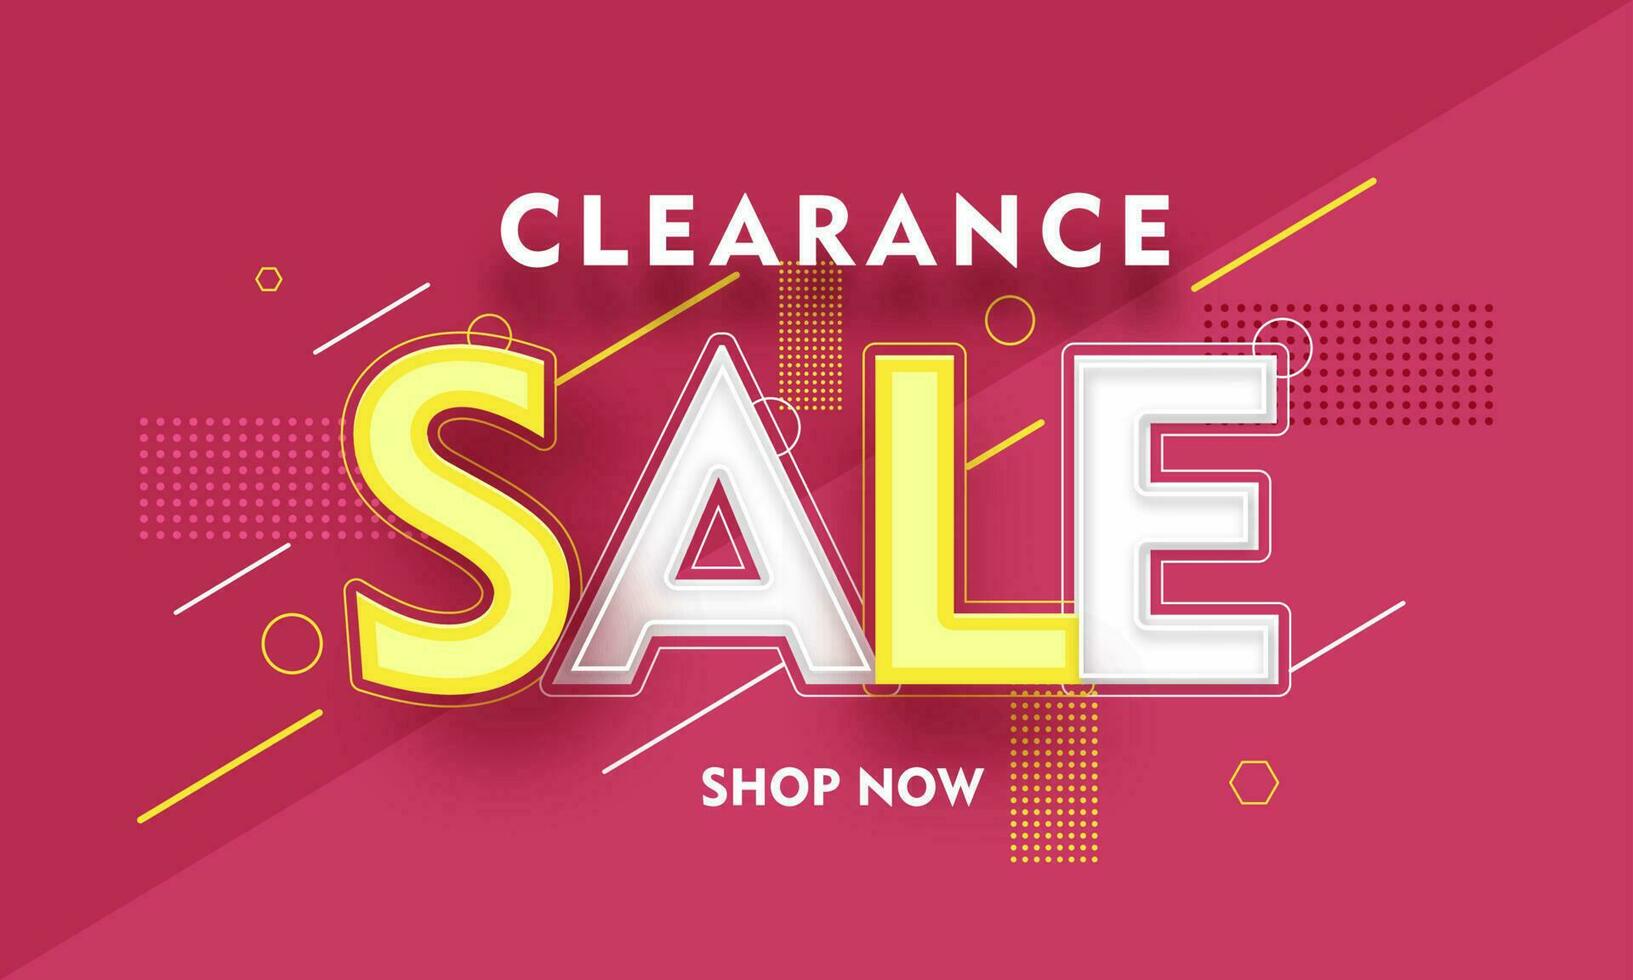 Clearance Sale banner or poster design with abstract elements on pink background. vector